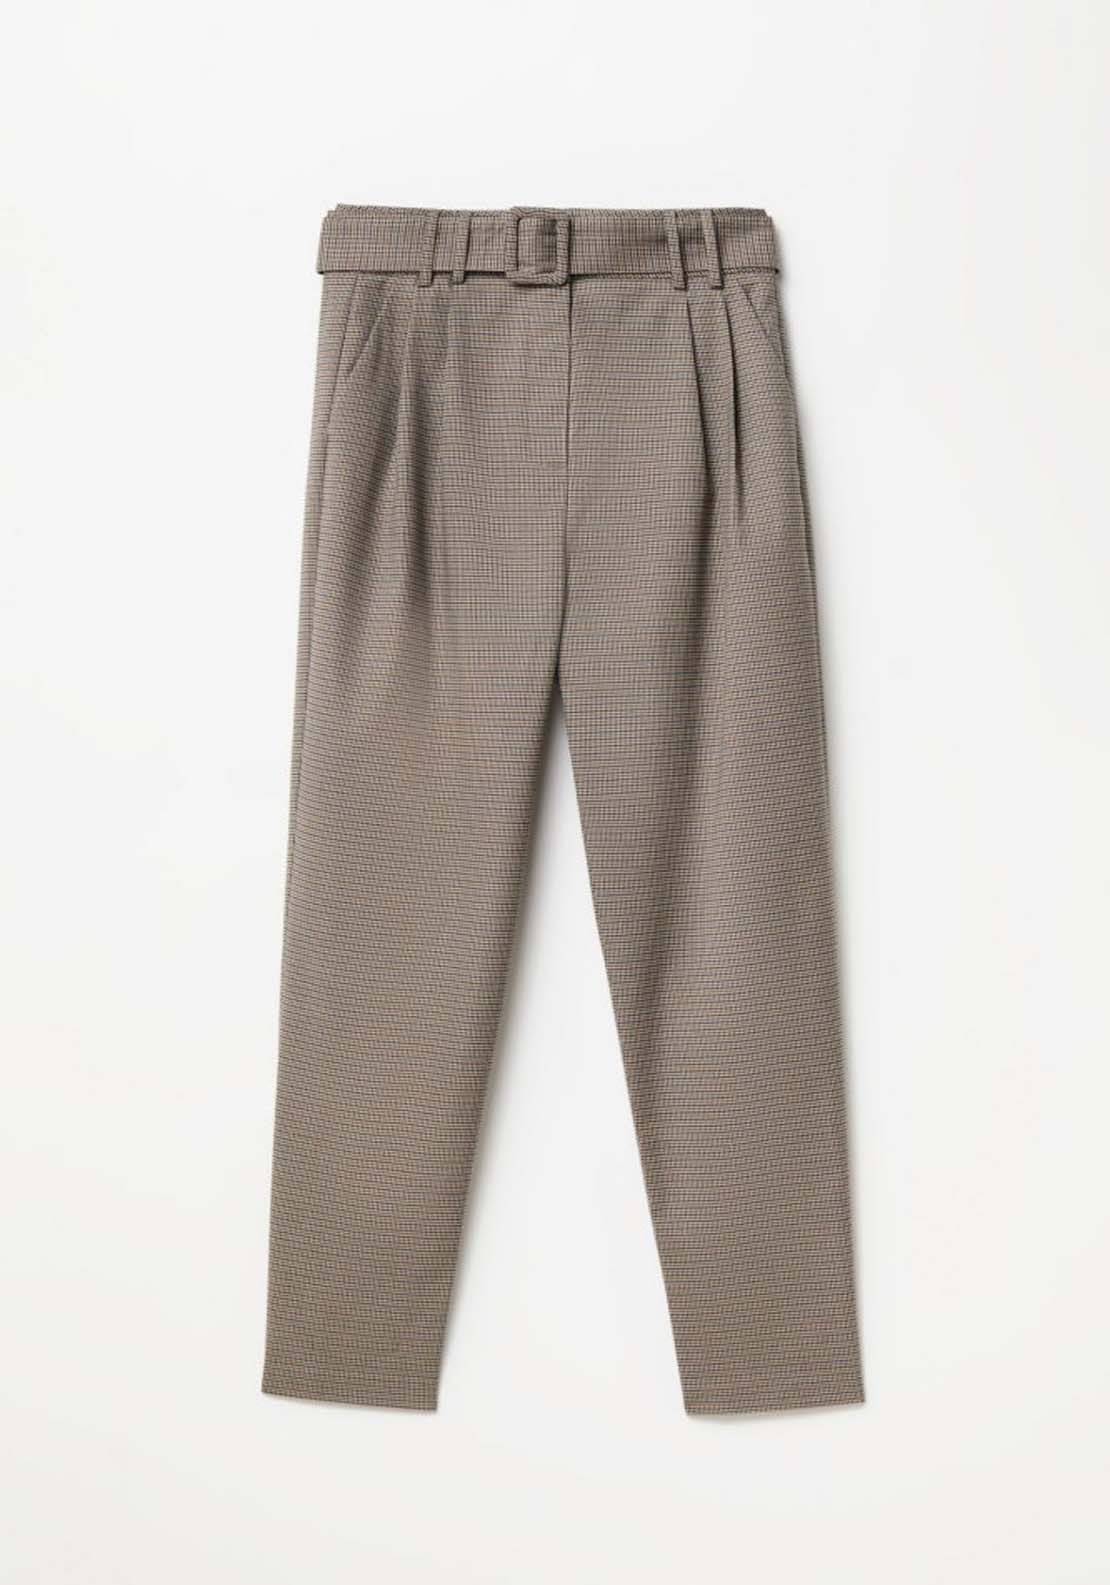 Sfera Checkered Trousers Belt - Brown 5 Shaws Department Stores